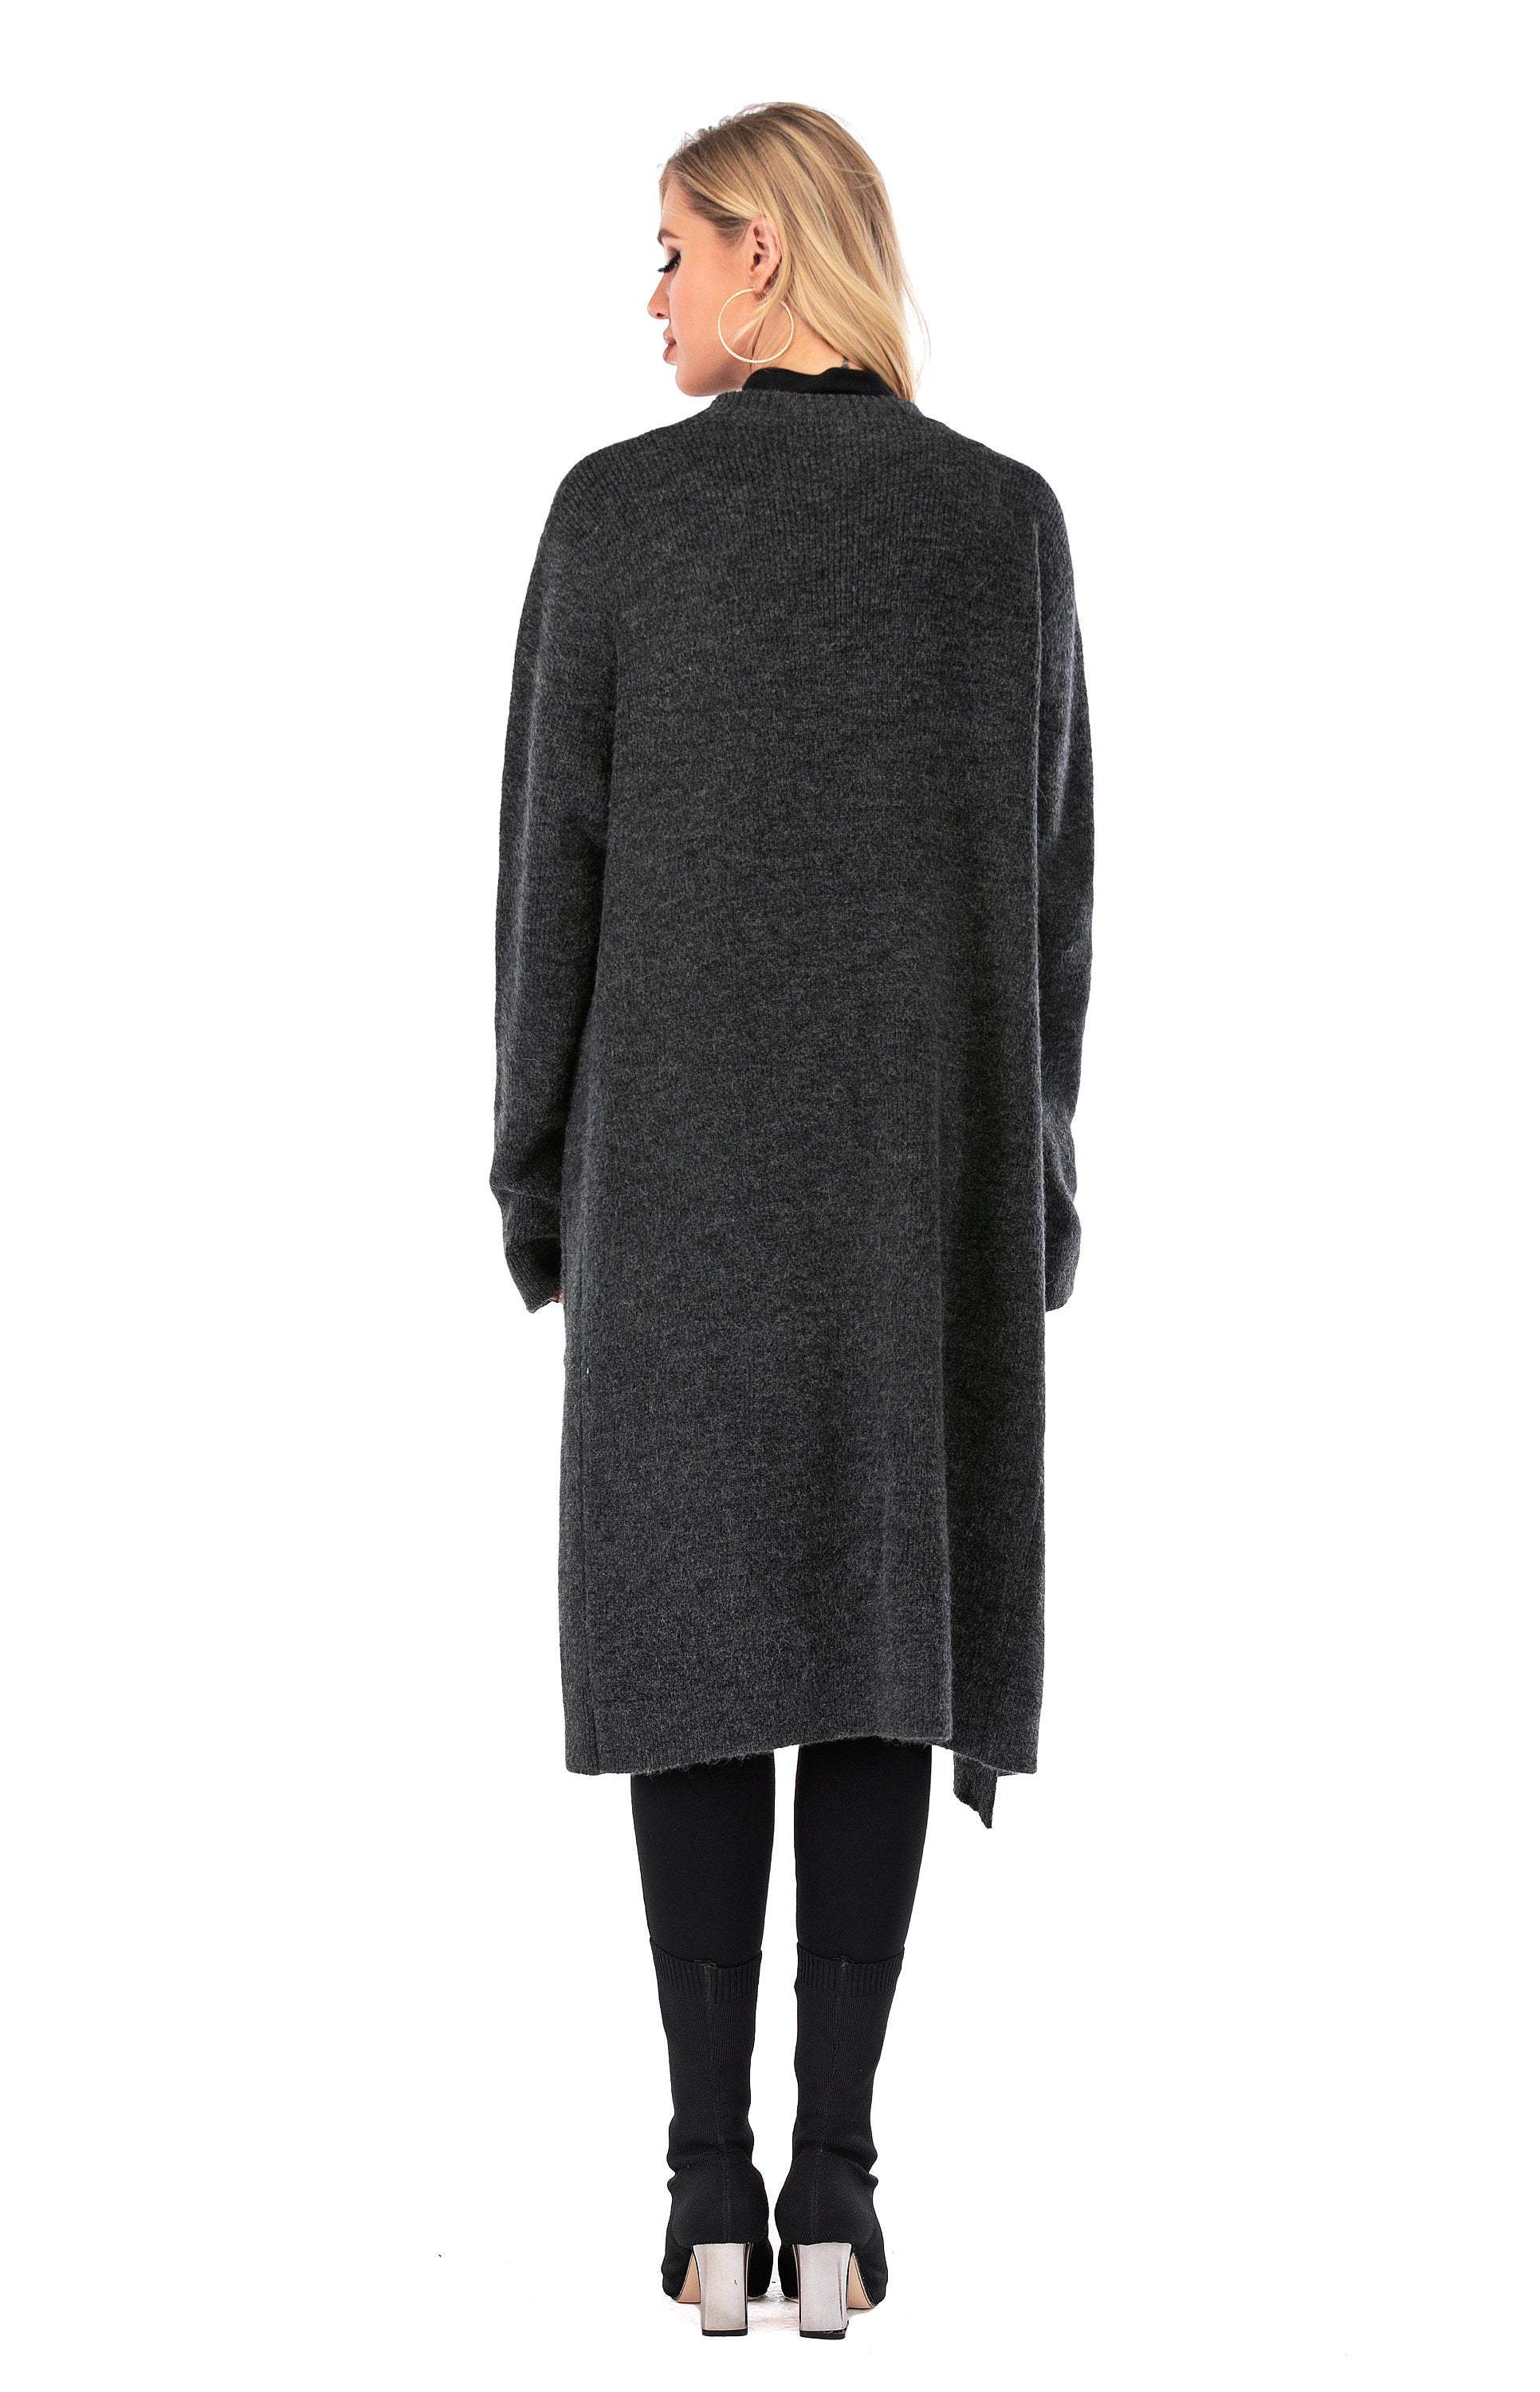 Picture of a Plain Women's Wool Open Front Cardigan with Pockets back view